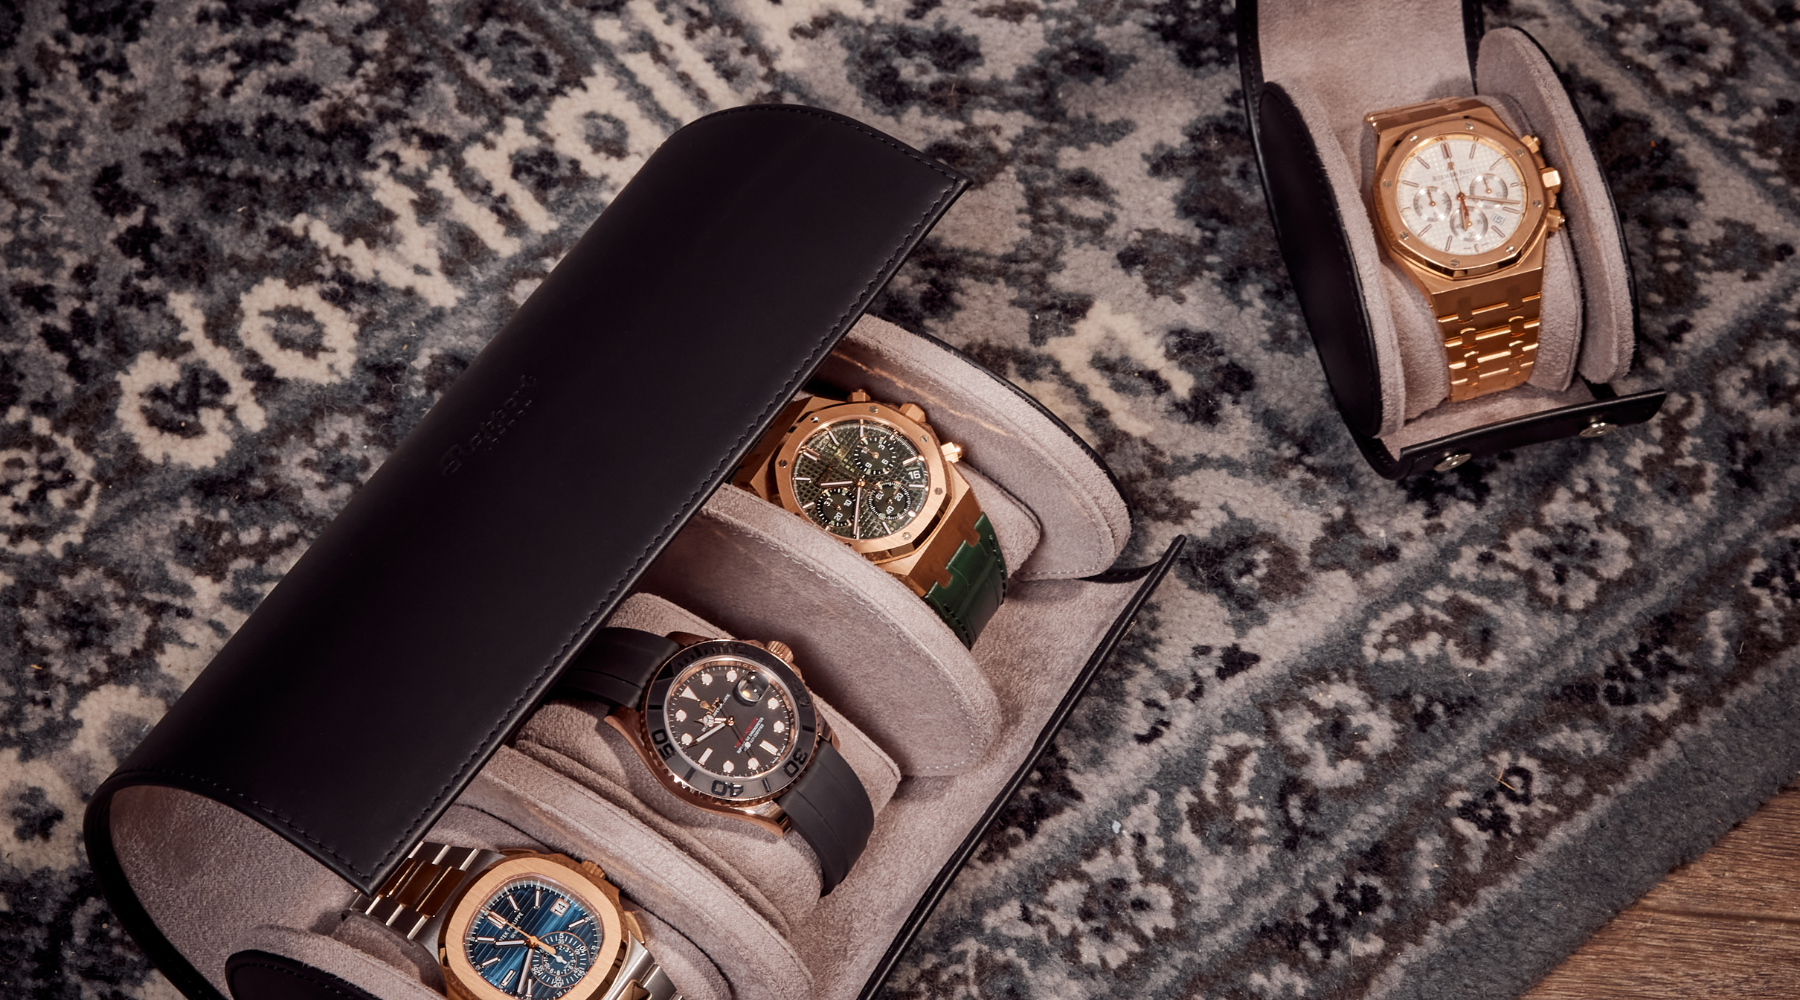 Watch Winder, Watch Box or Watch Roll: What’s The Difference?